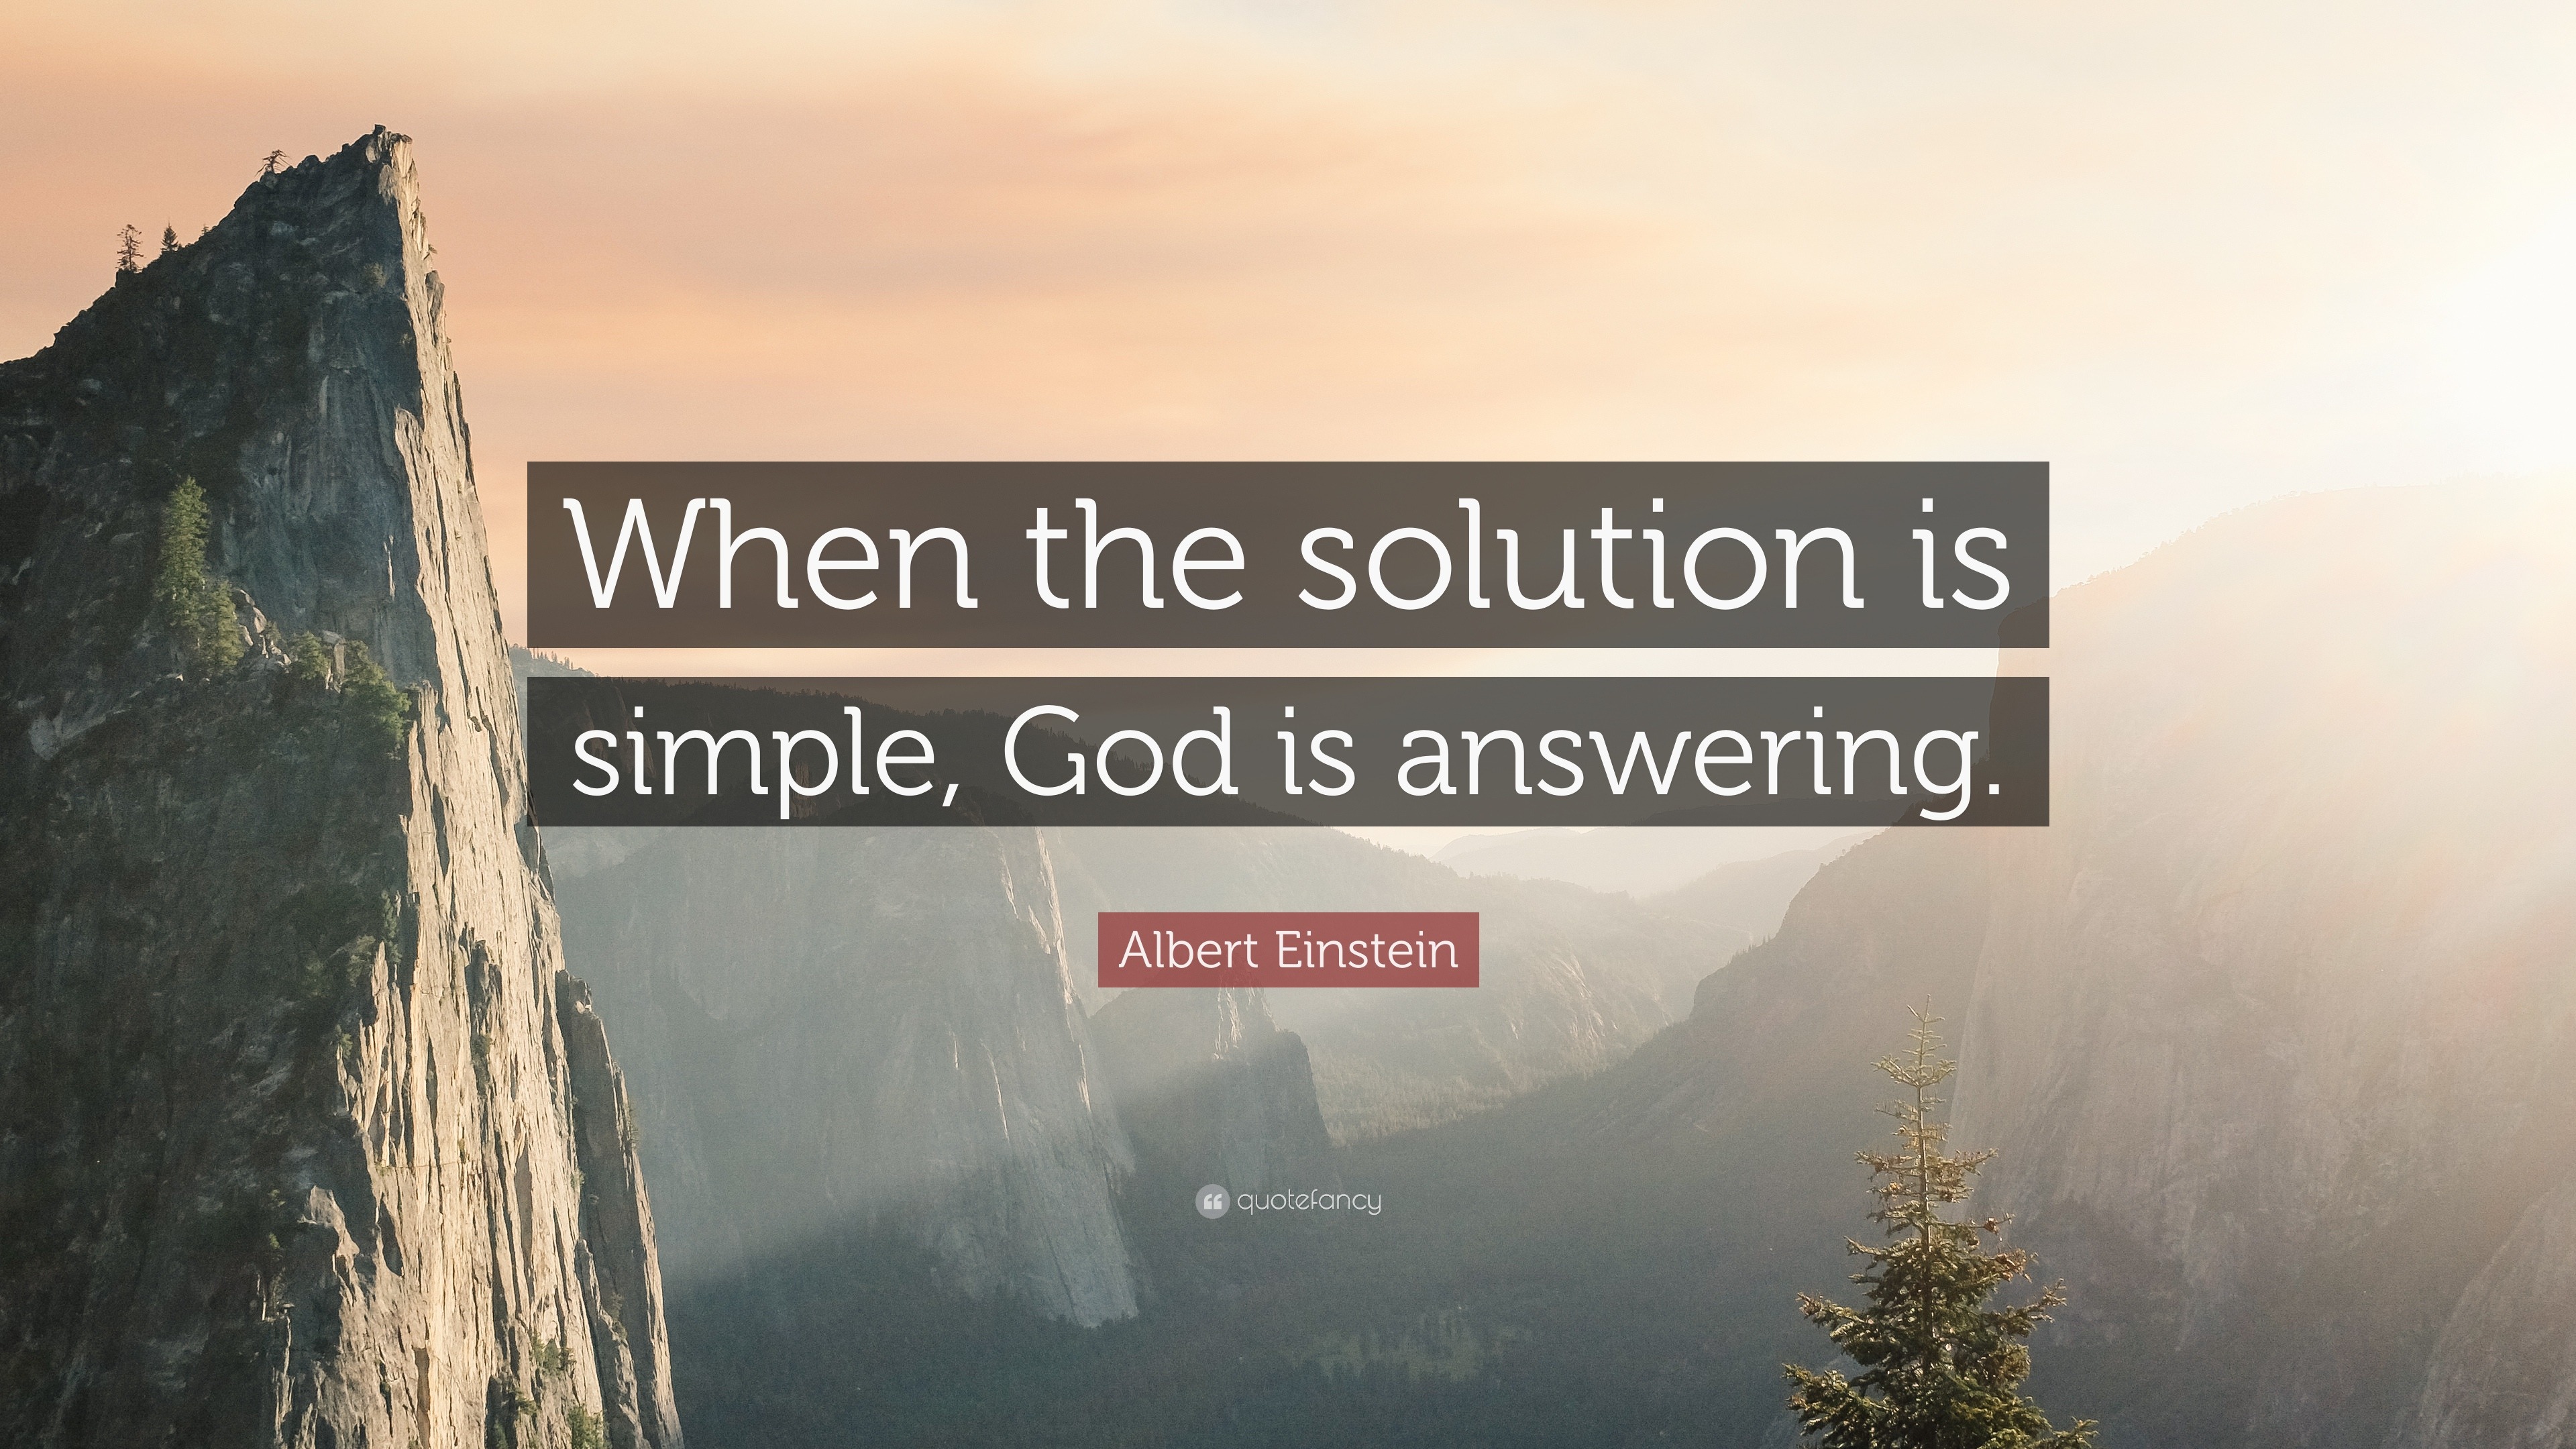 Albert Einstein Quote: “When the solution is simple, God is answering